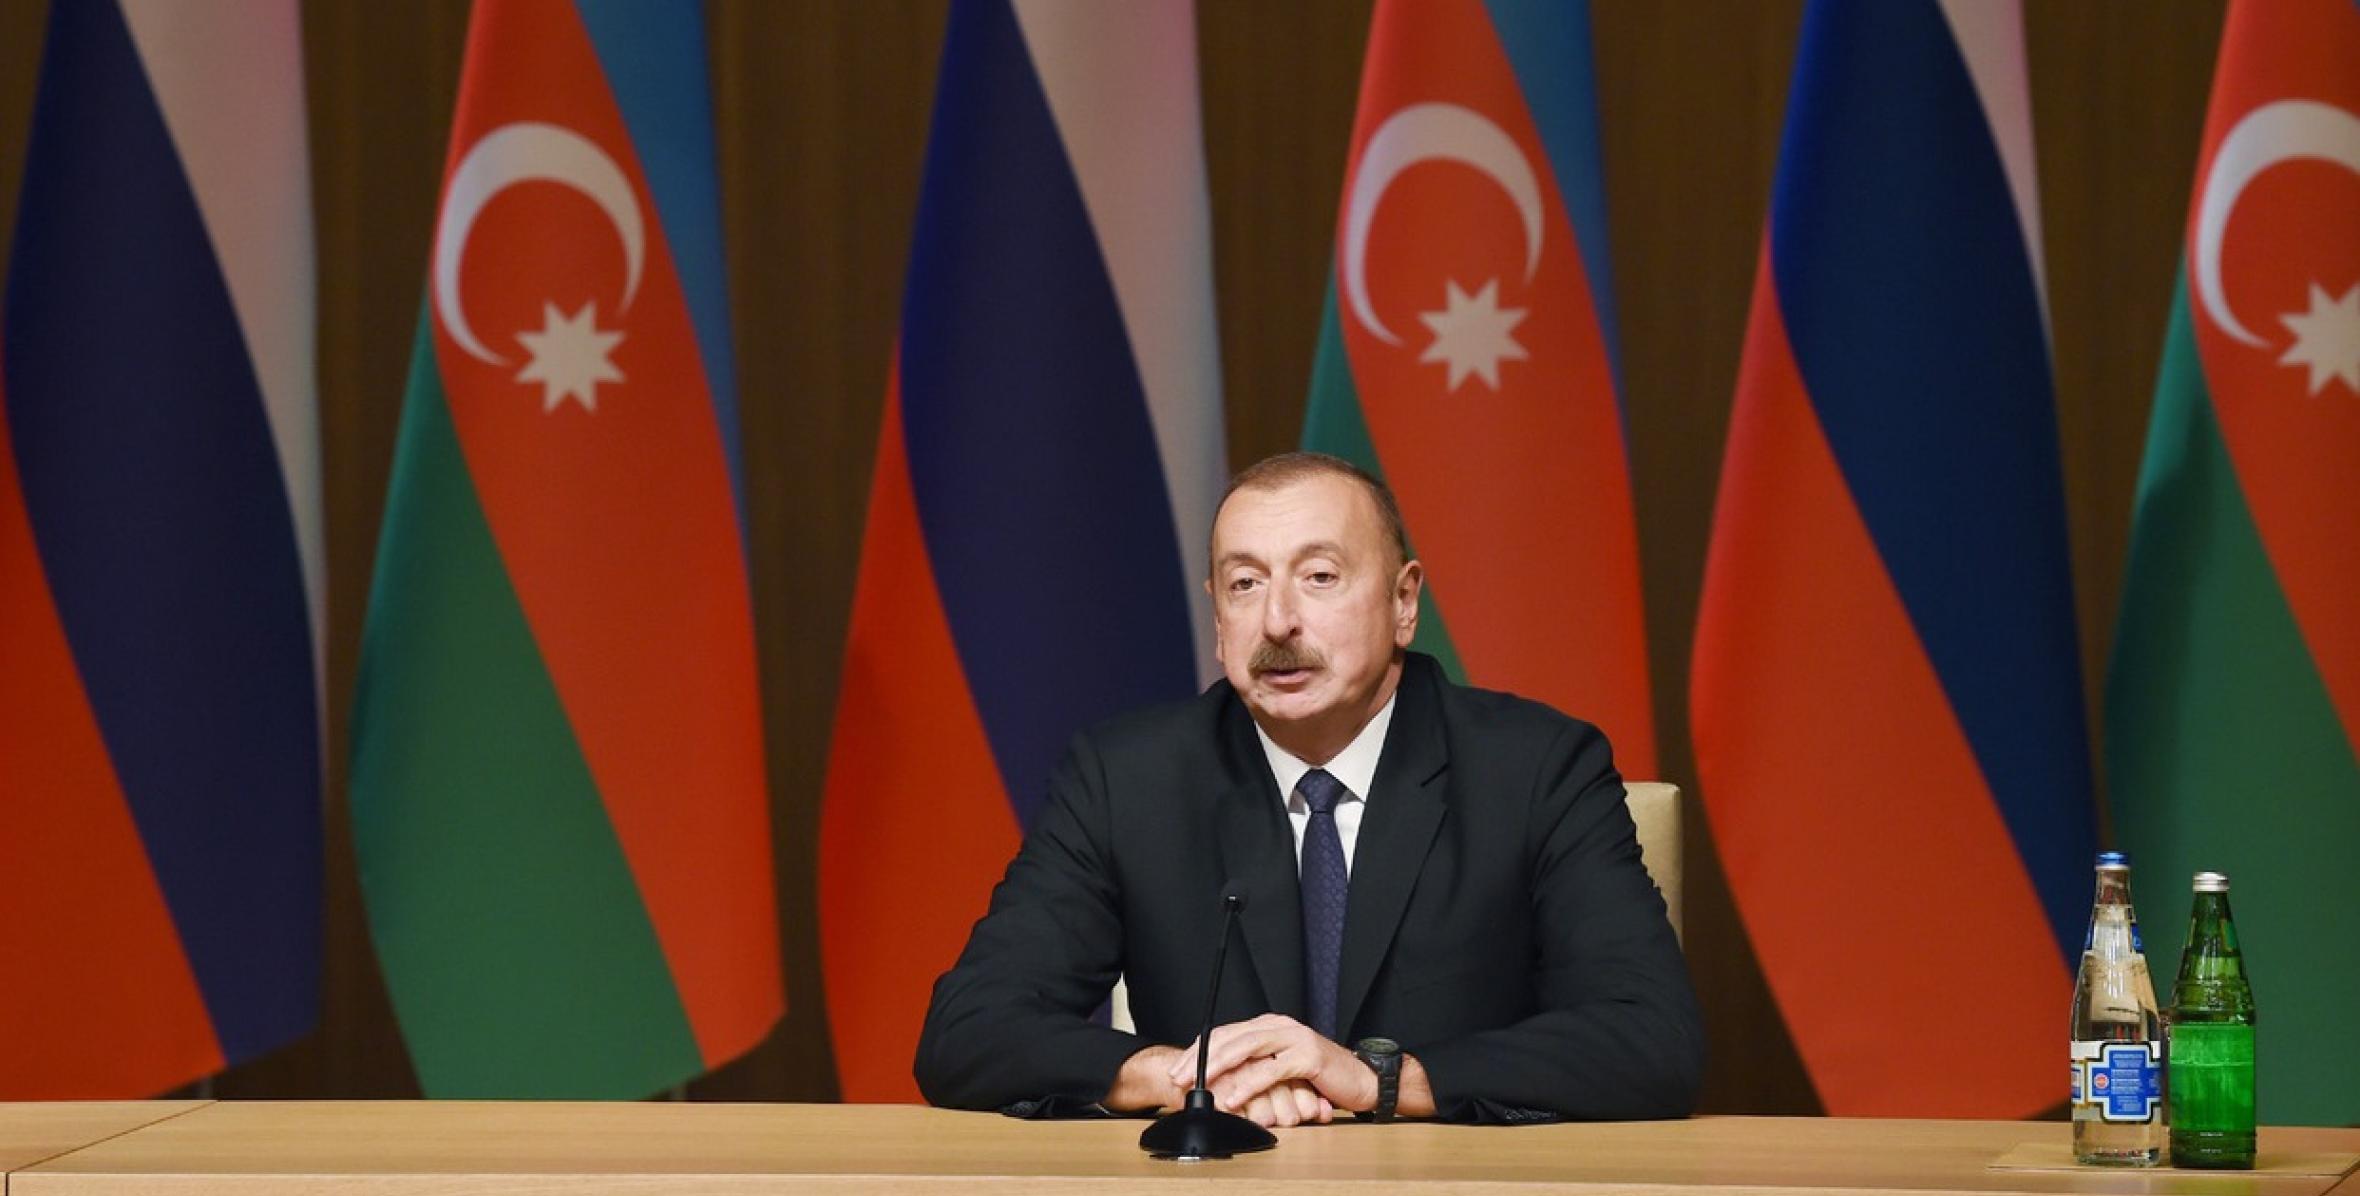 Speech by Ilham Aliyev at the official opening of 9th Azerbaijan-Russia Interregional Forum